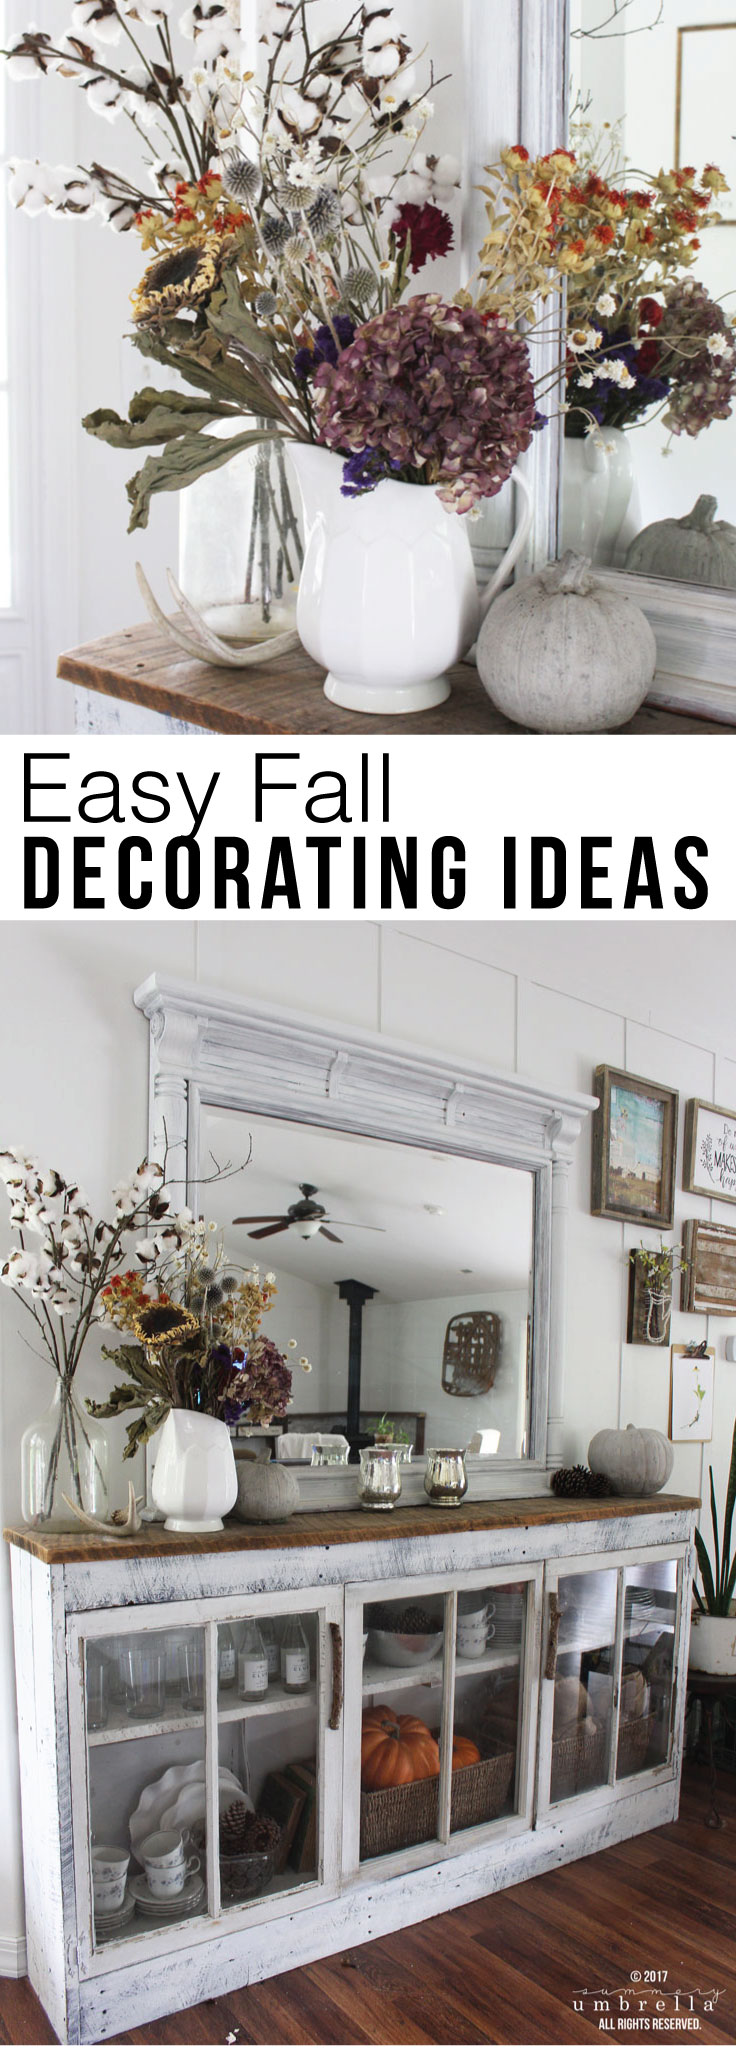 DIY Hanging Centerpiece for Your Fall Table 